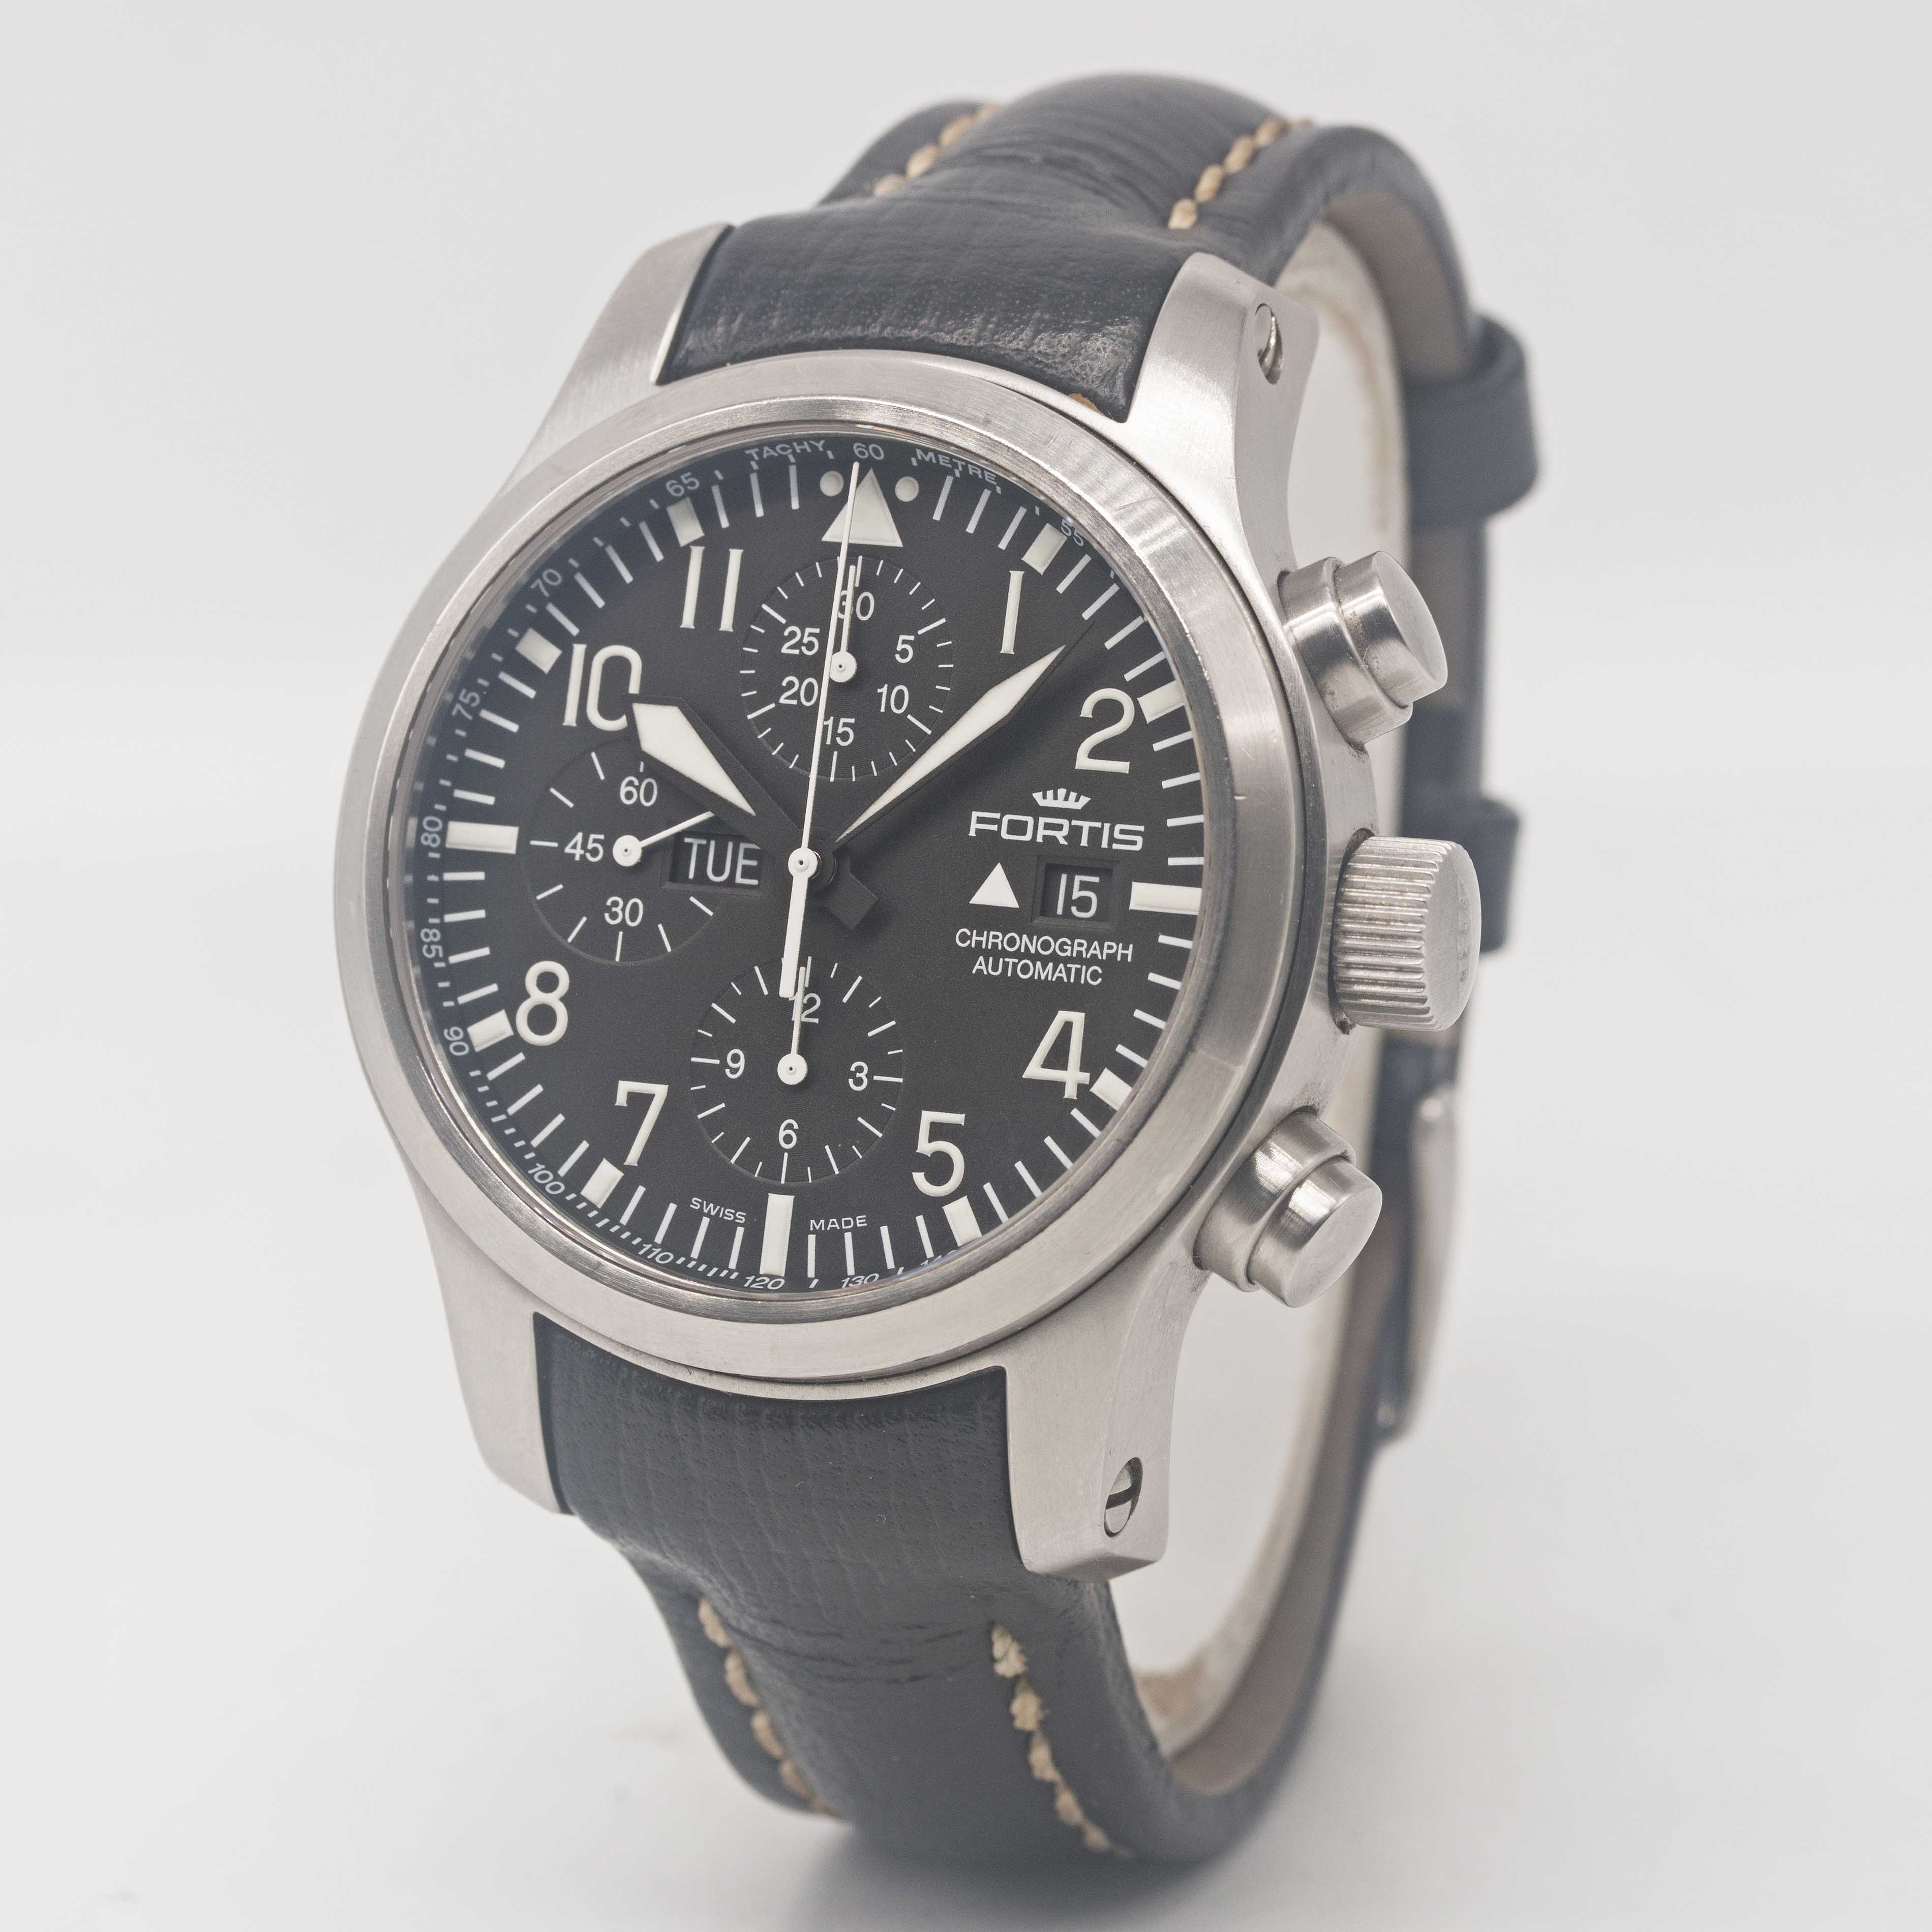 A GENTLEMAN'S STAINLESS STEEL FORTIS B-42 AUTOMATIC CHRONOGRAPH WRIST WATCH DATED 2008, REF. 656. - Image 3 of 6